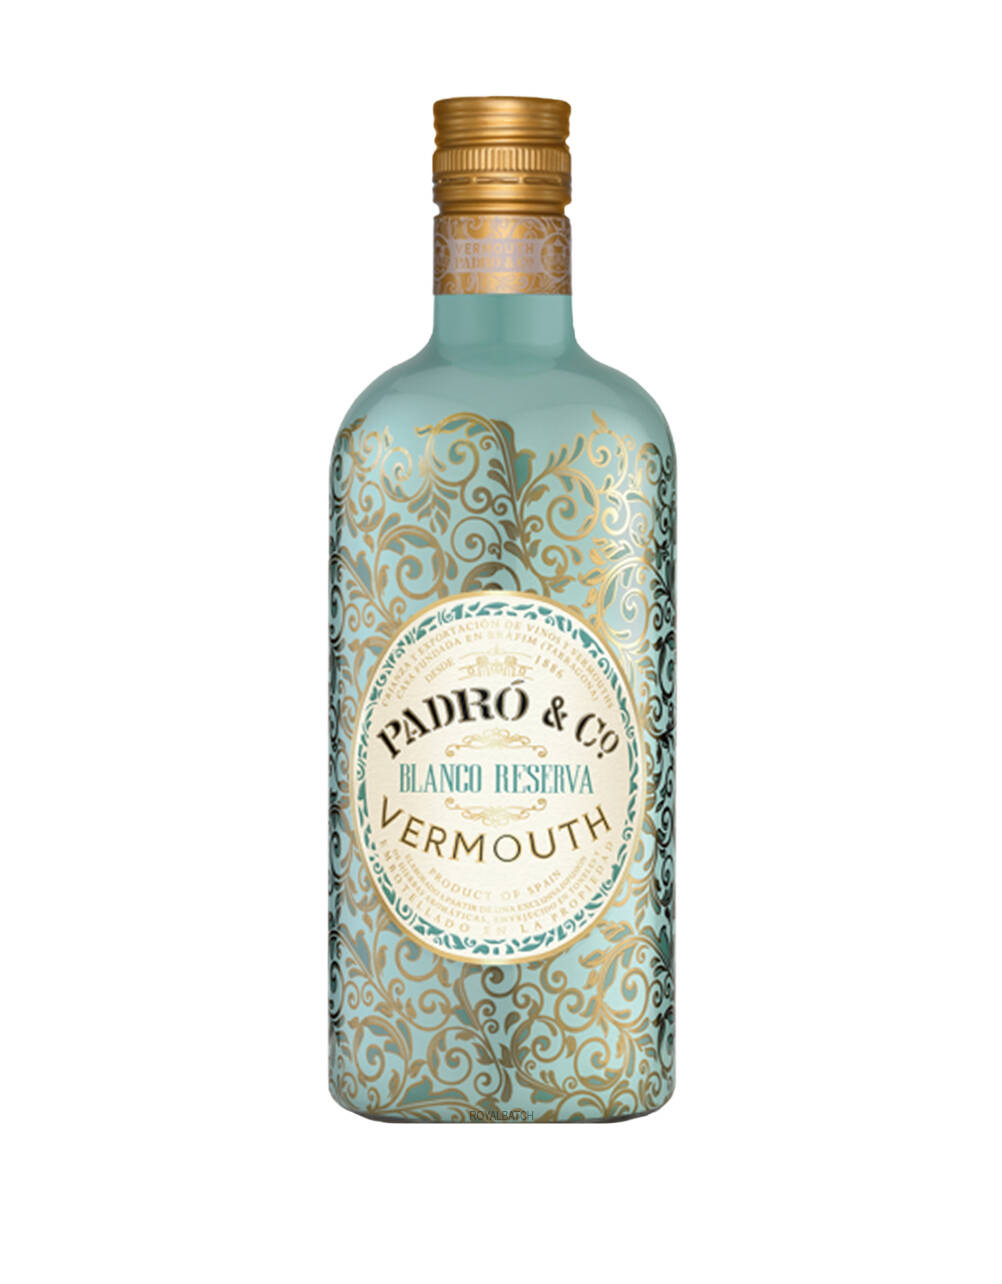 Padro and Co Blanco Reserva Vermouth